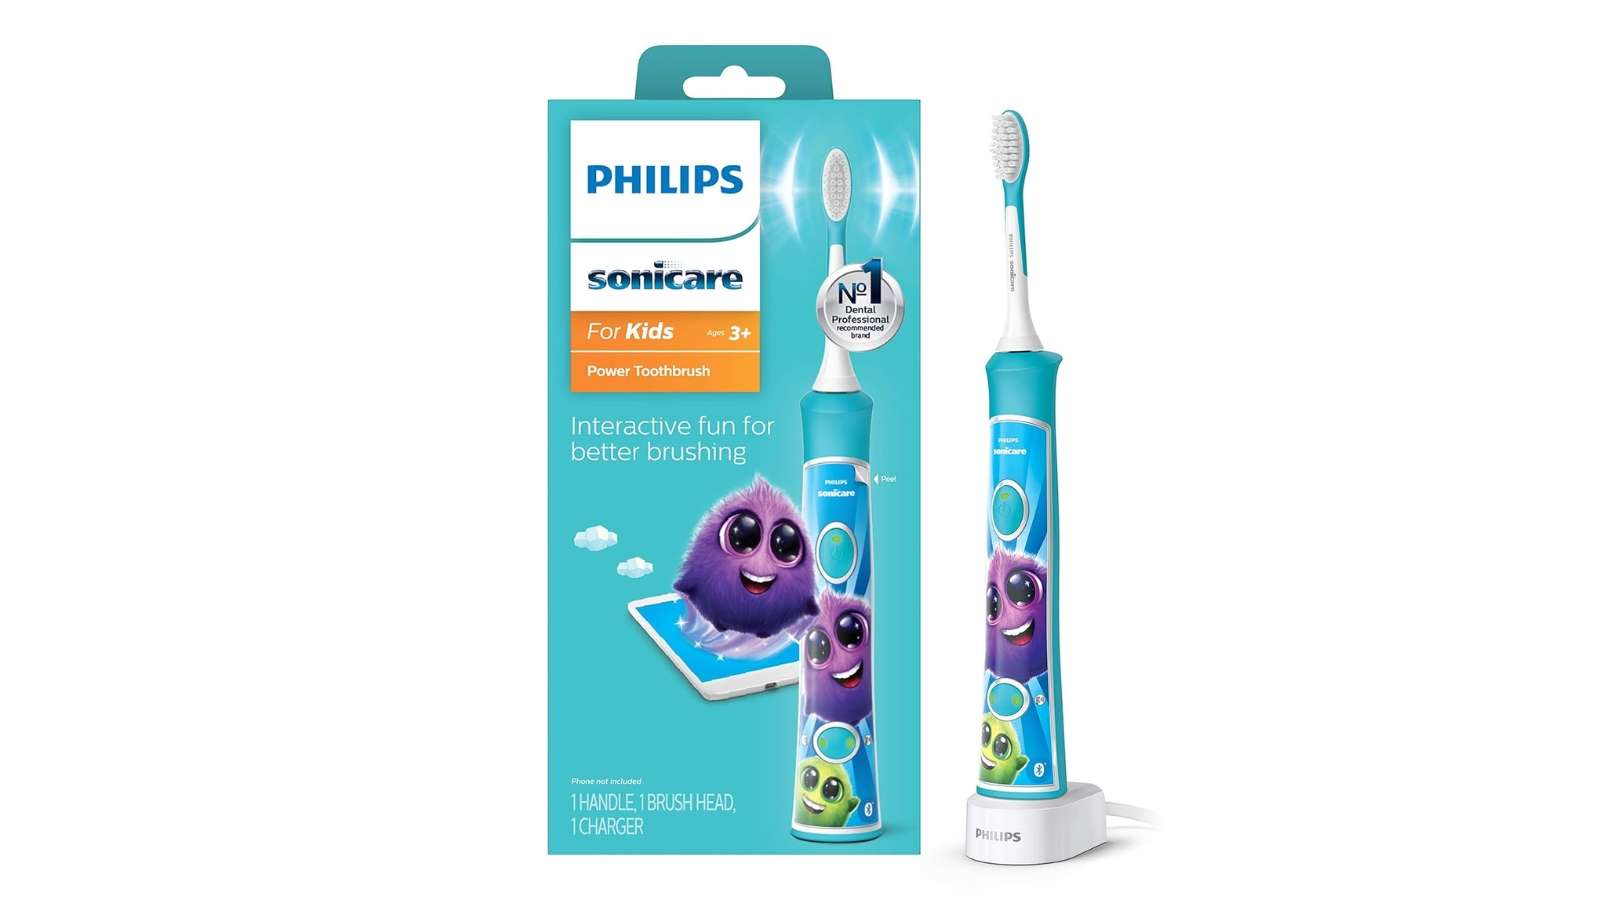 product review on philips sonicare for kids - display of the philips soincare for kids packaging and the the toothbrush